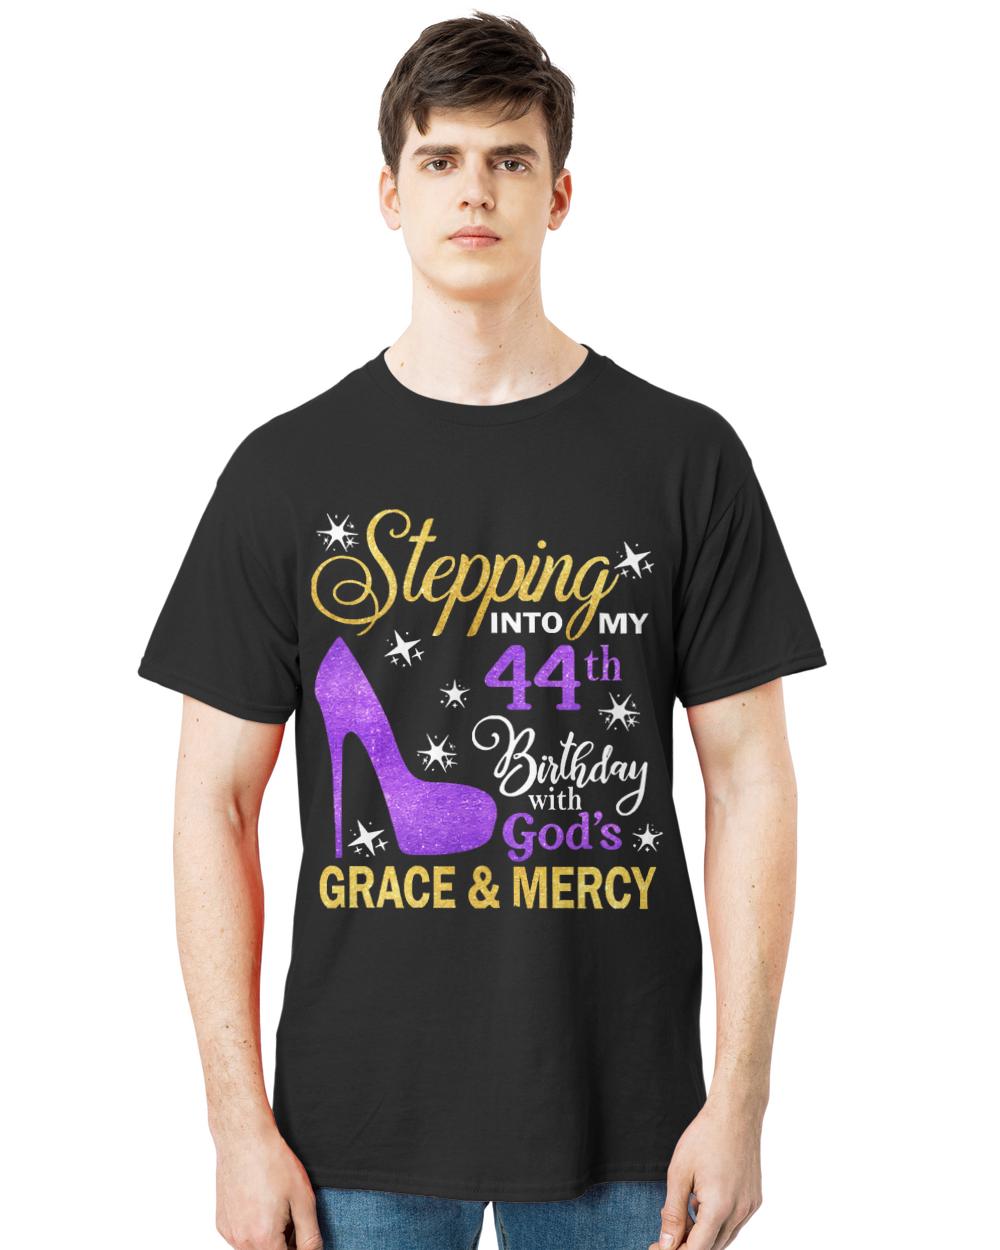 44th Birthday T-ShirtStepping Into My 44th Birthday With God's Grace & Mercy Bday T-Shirt (2)